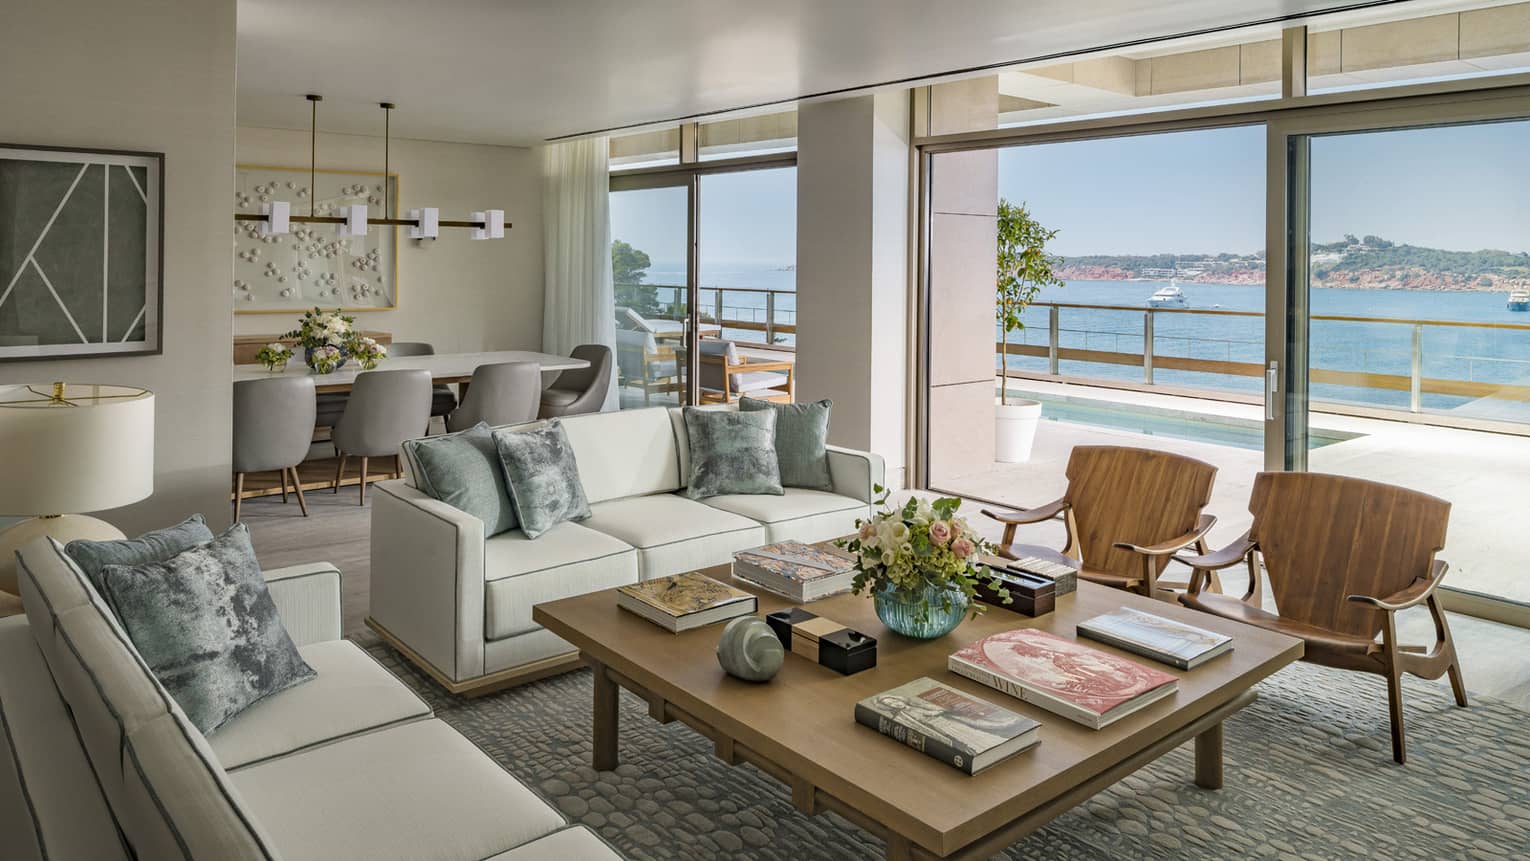 Arion Royal Suite living area with white sofas, square coffee table, arm chairs, dining table in background, floor-to-ceiling window with view of plunge pool and Mediterranean Sea